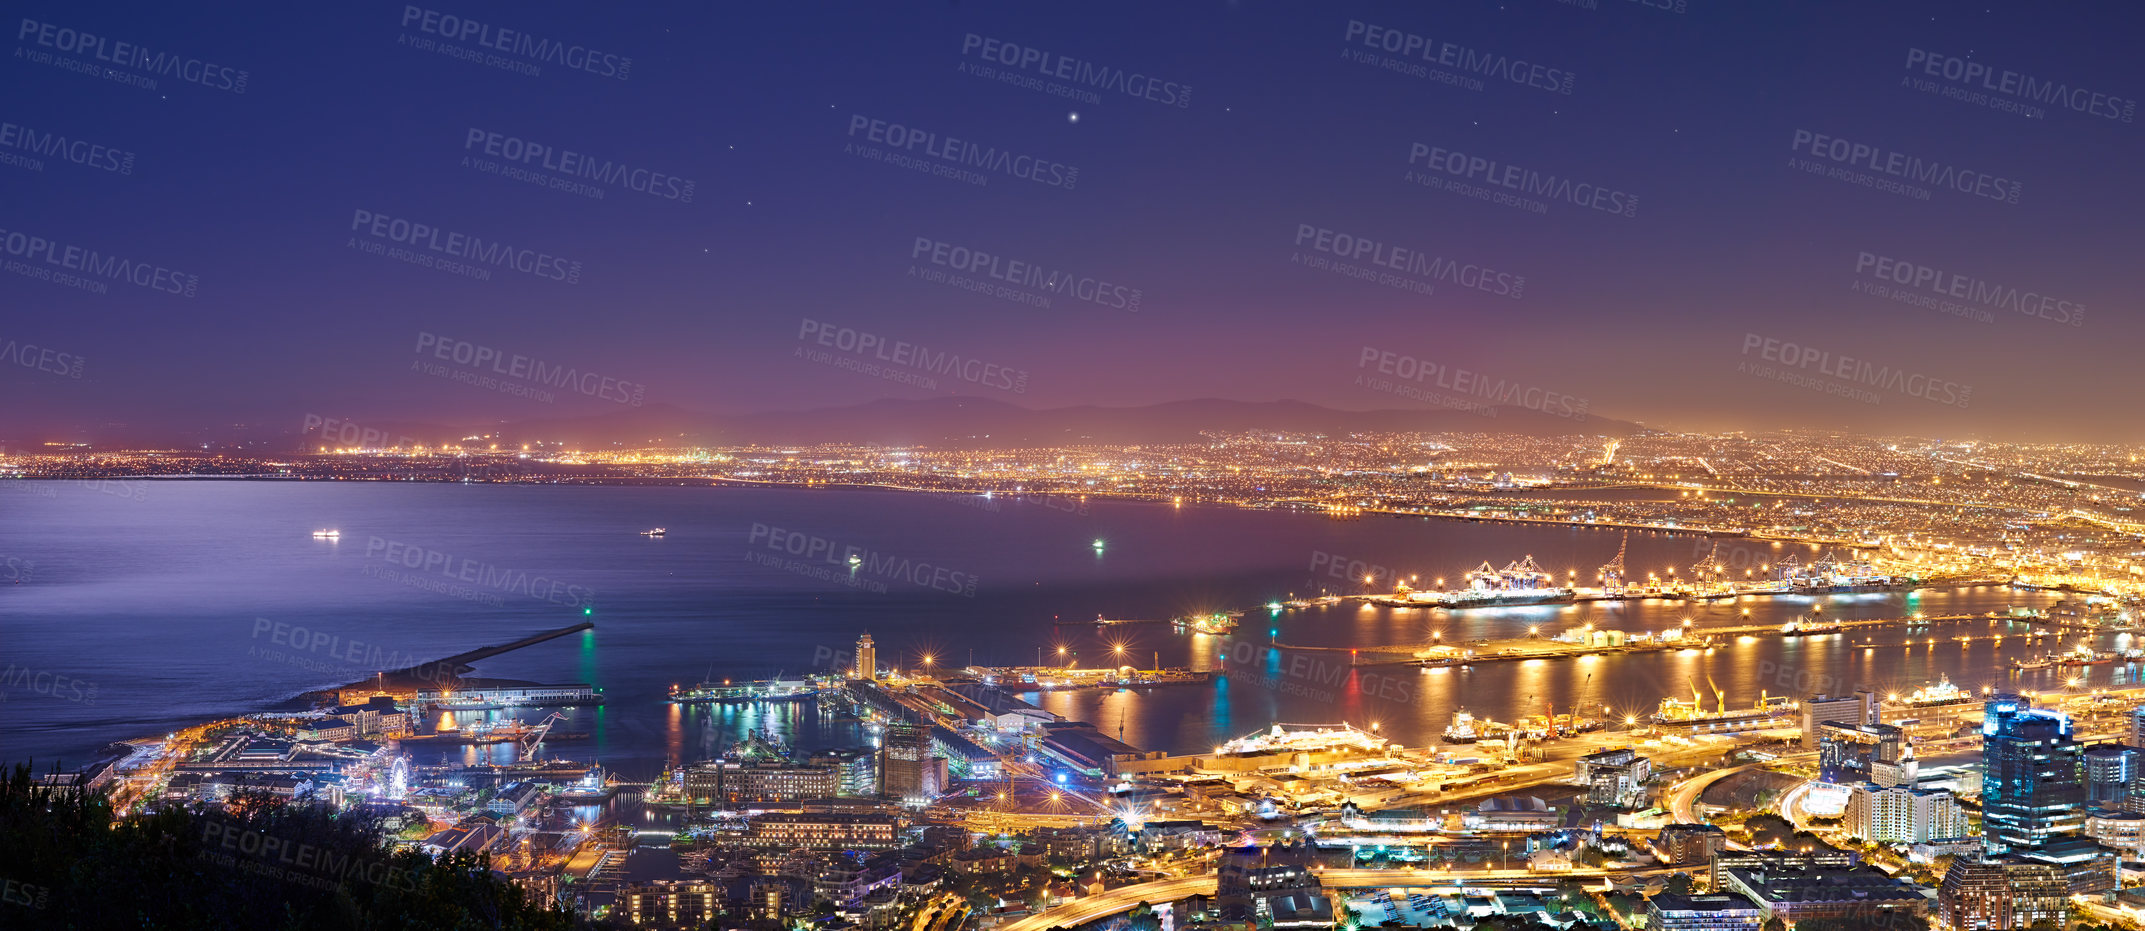 Buy stock photo Scenic landscape view of Cape Town city and harbour lit at night after sunset from Signal Hill, South Africa. Electricity and electrical lights burning in evening with clear blue sky and copy space